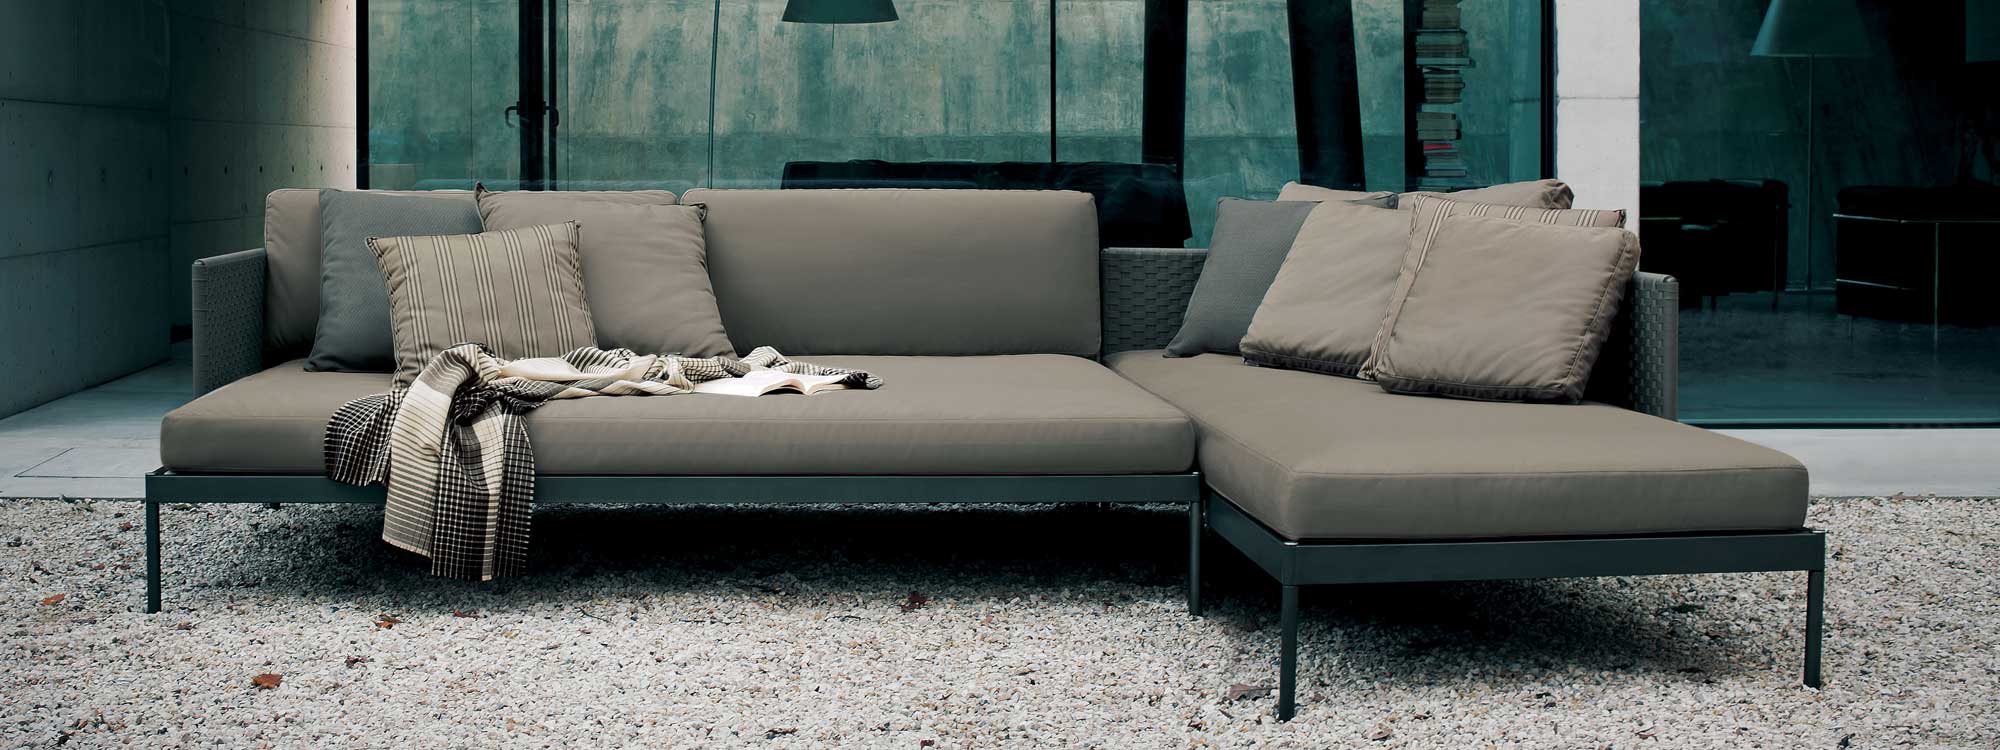 Image of Basket outdoor corner sofa with smoke colored aluminum frame and taupe cushions, shown on gravel courtyard